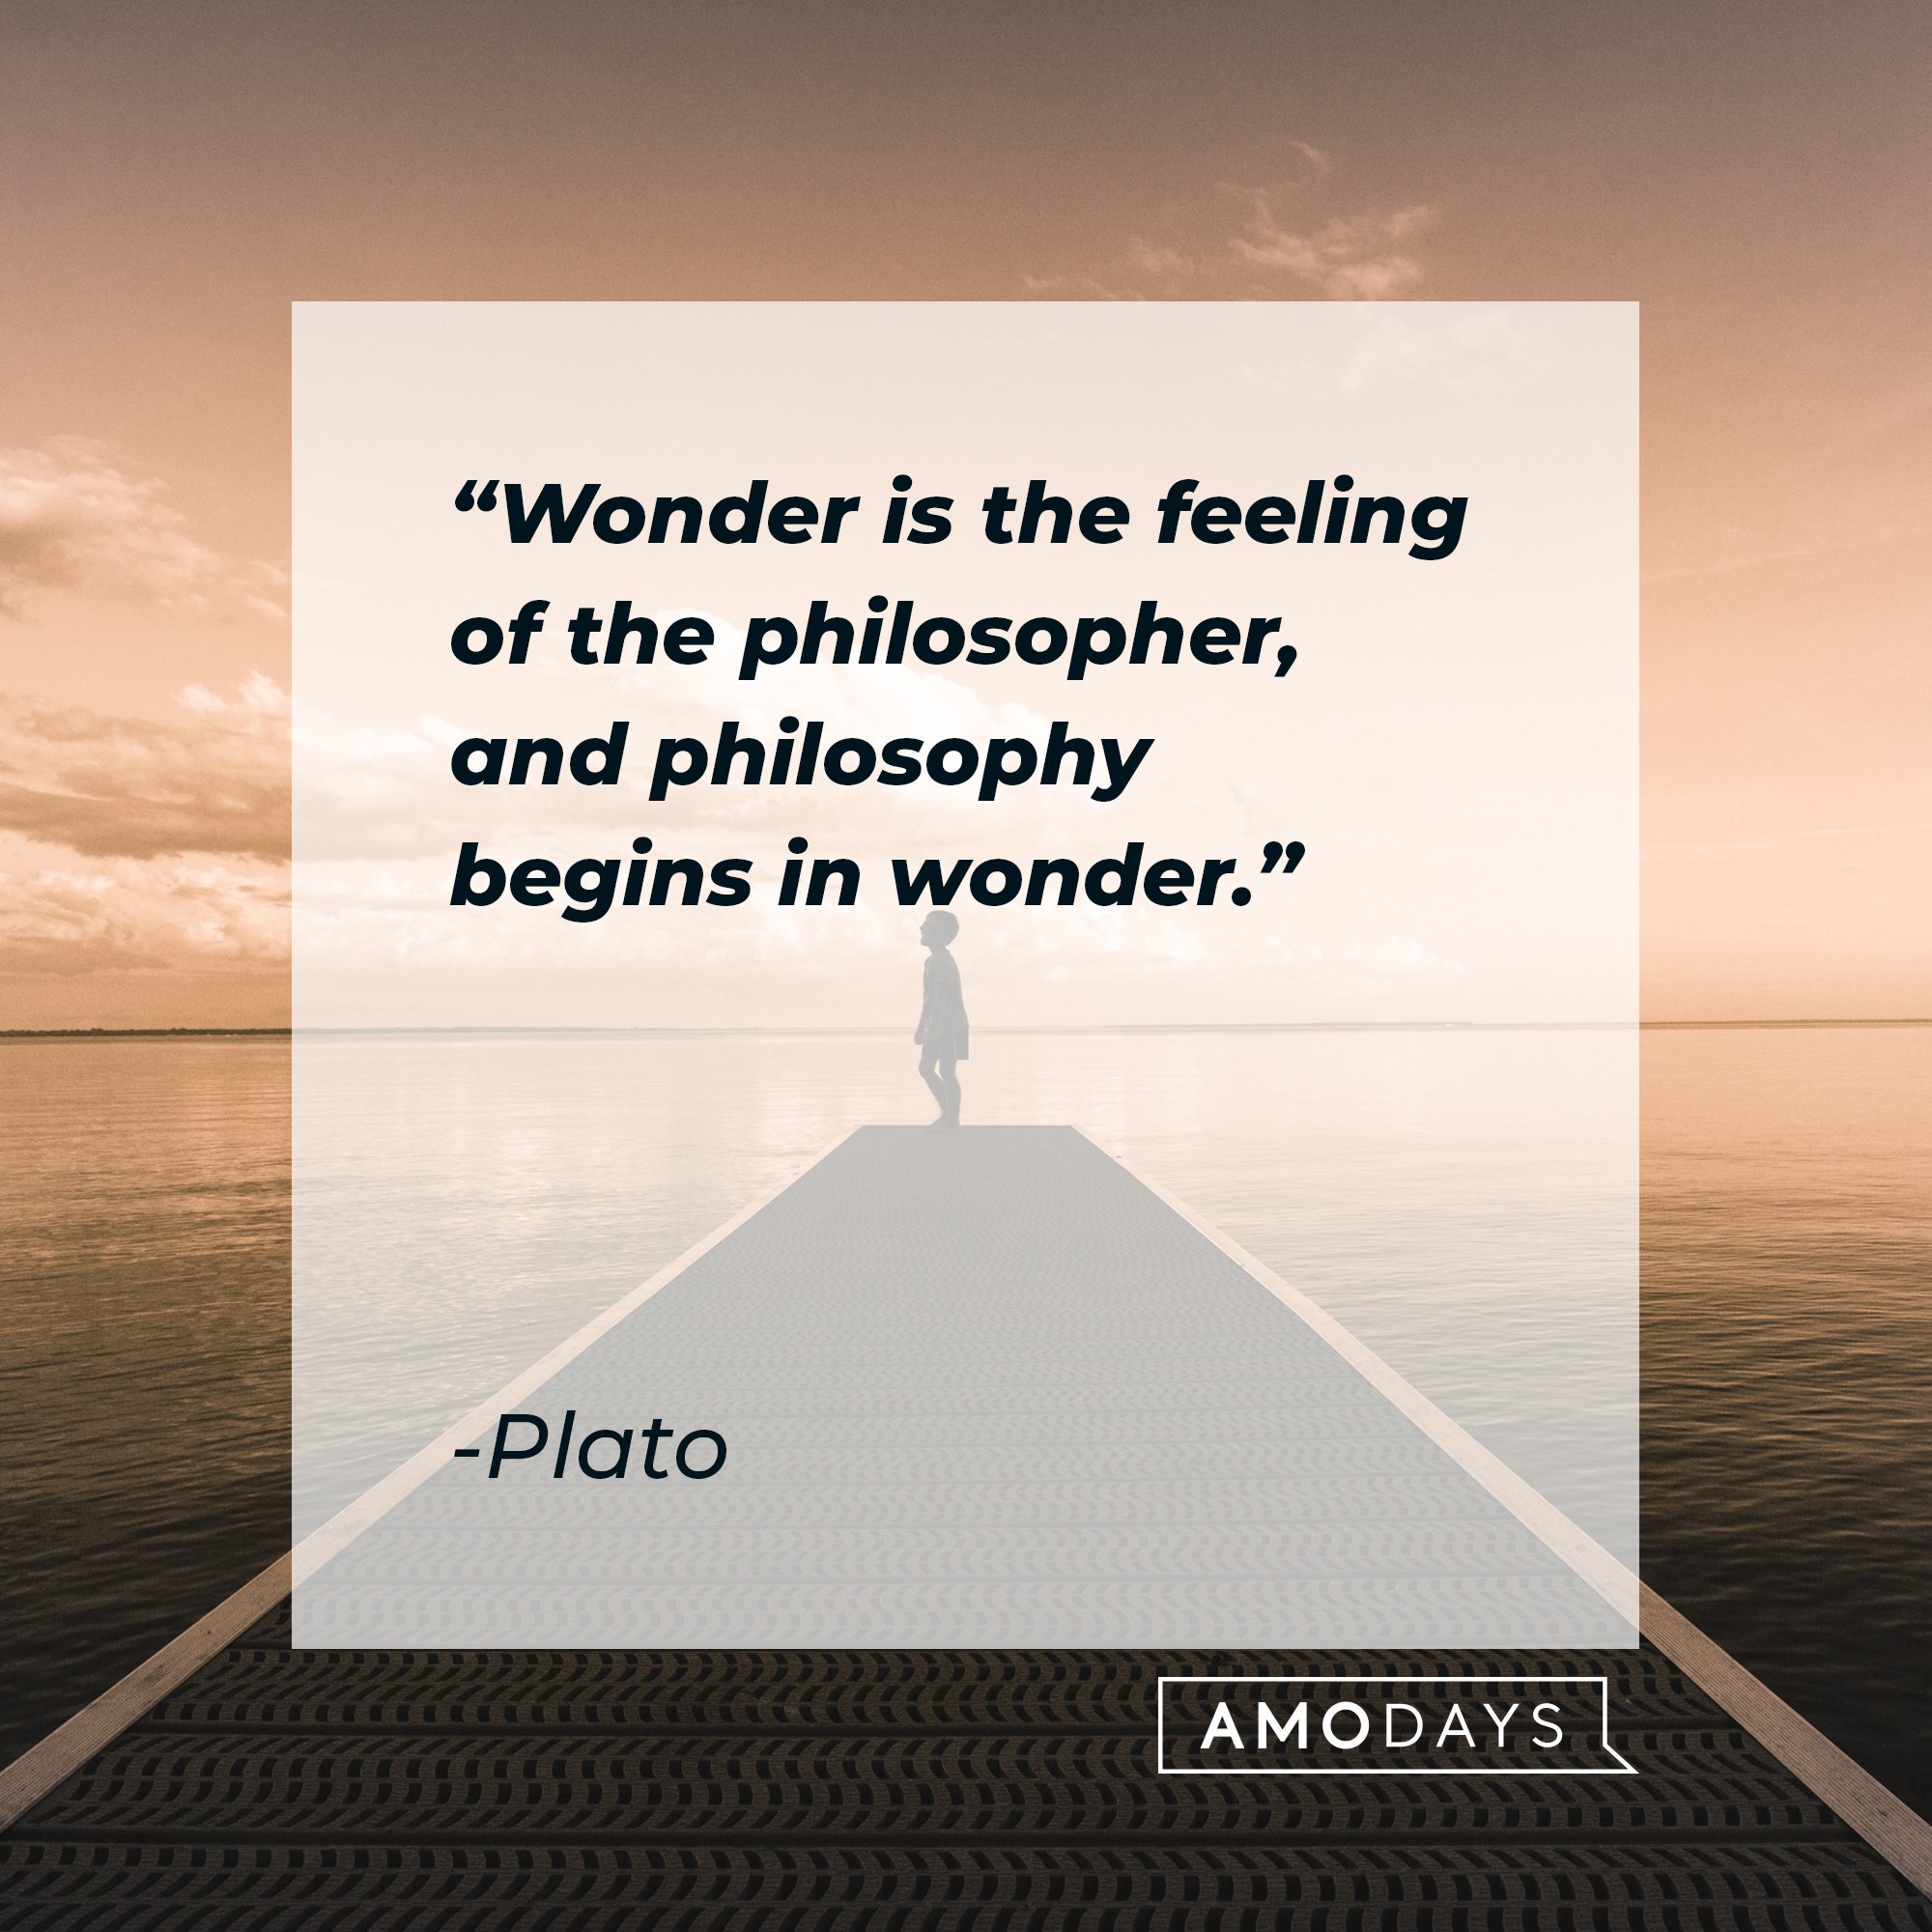 Plato's quote: "Wonder is the feeling of the philosopher, and philosophy begins in wonder." |  Image: AmoDays